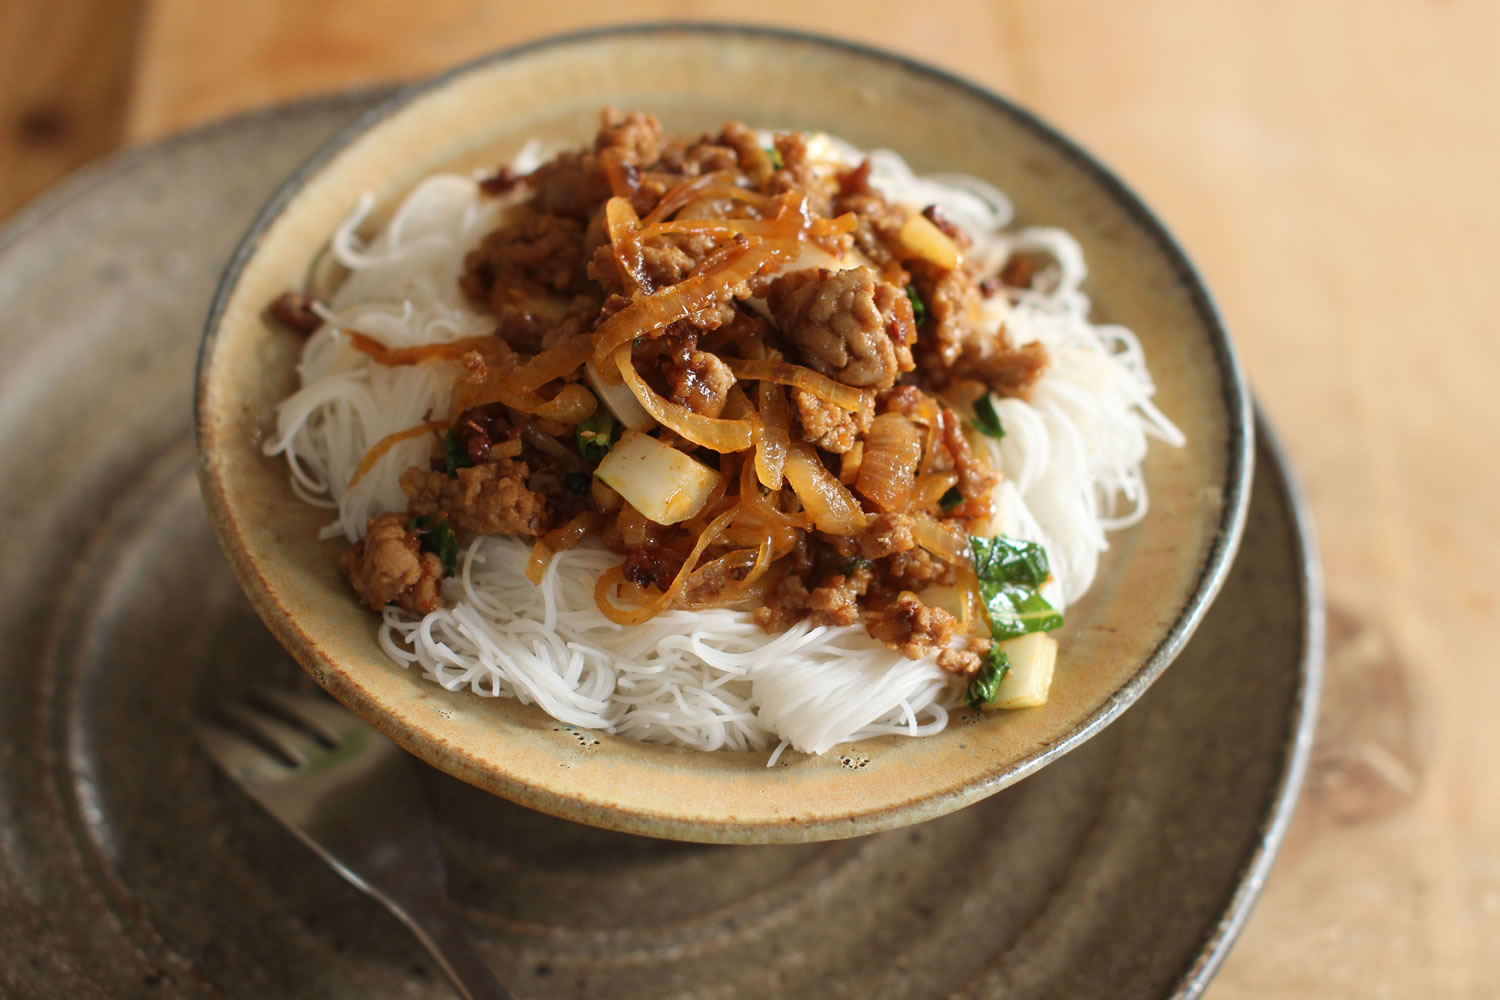 Sichuan pork ragu is adapted from a recipe in the book "Lucky Peach: 101 Easy Asian Recipes" by Peter Meehan.